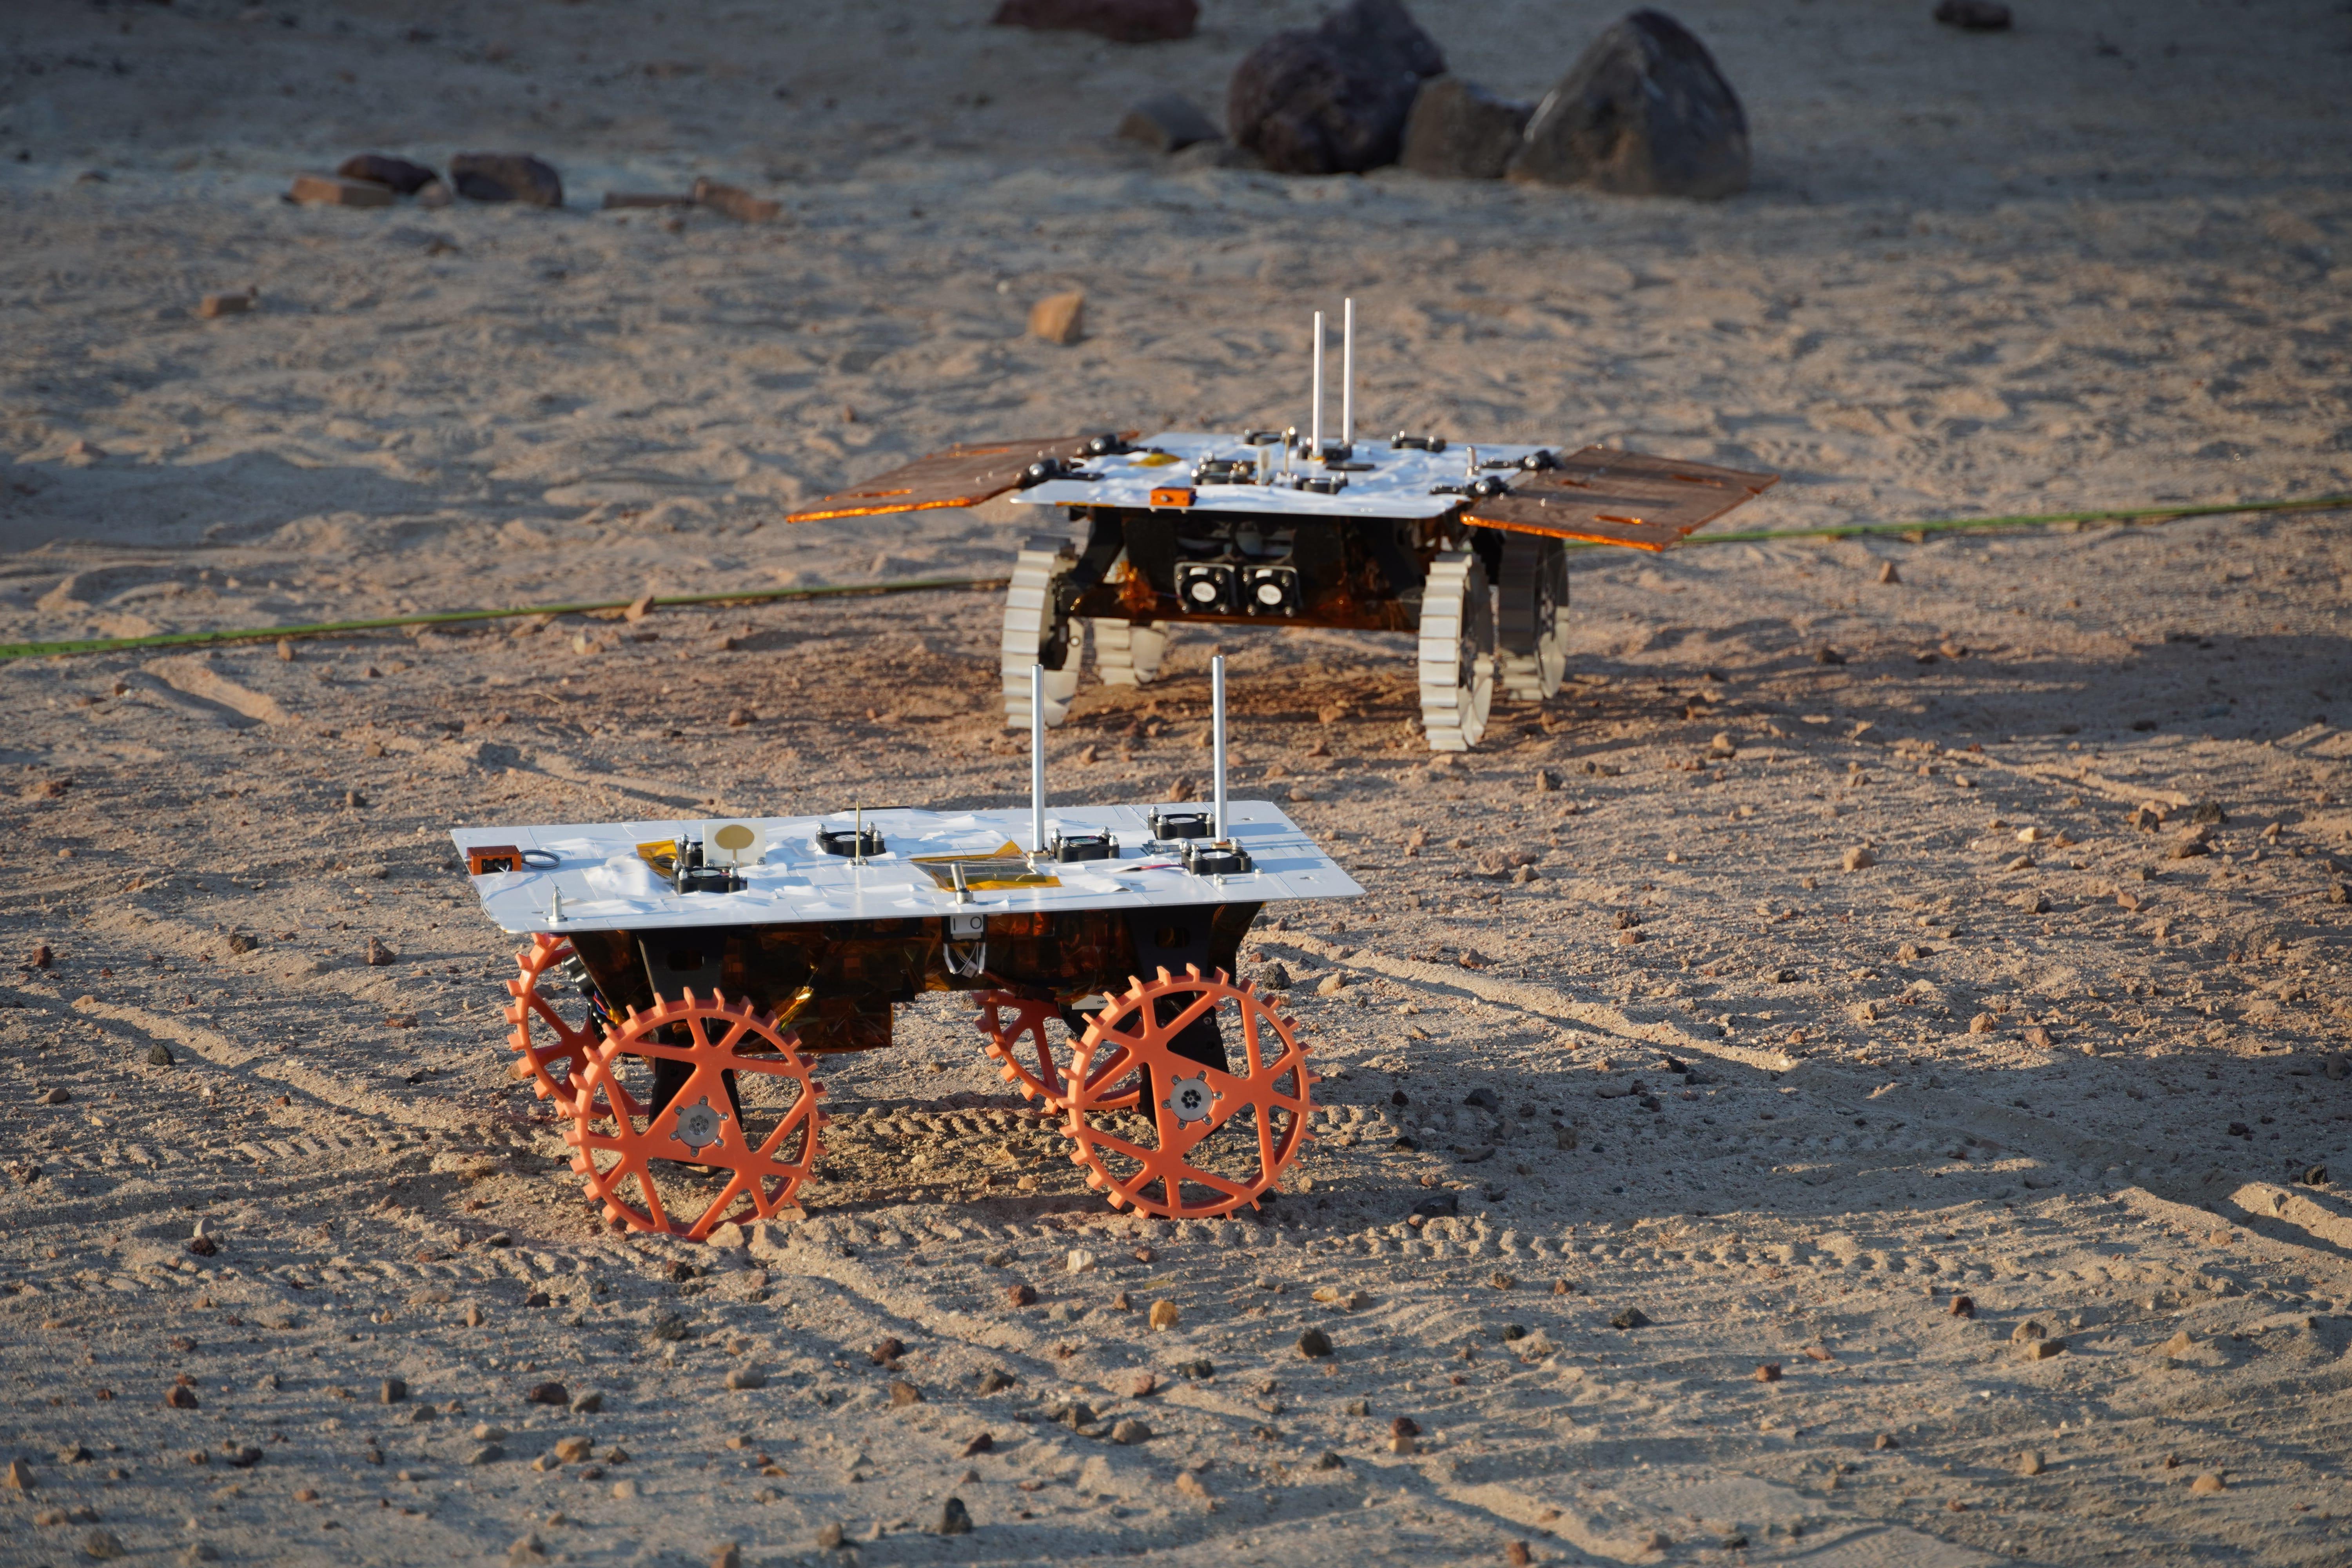 CADRE Rovers’ Test Drive in the Mars Yard